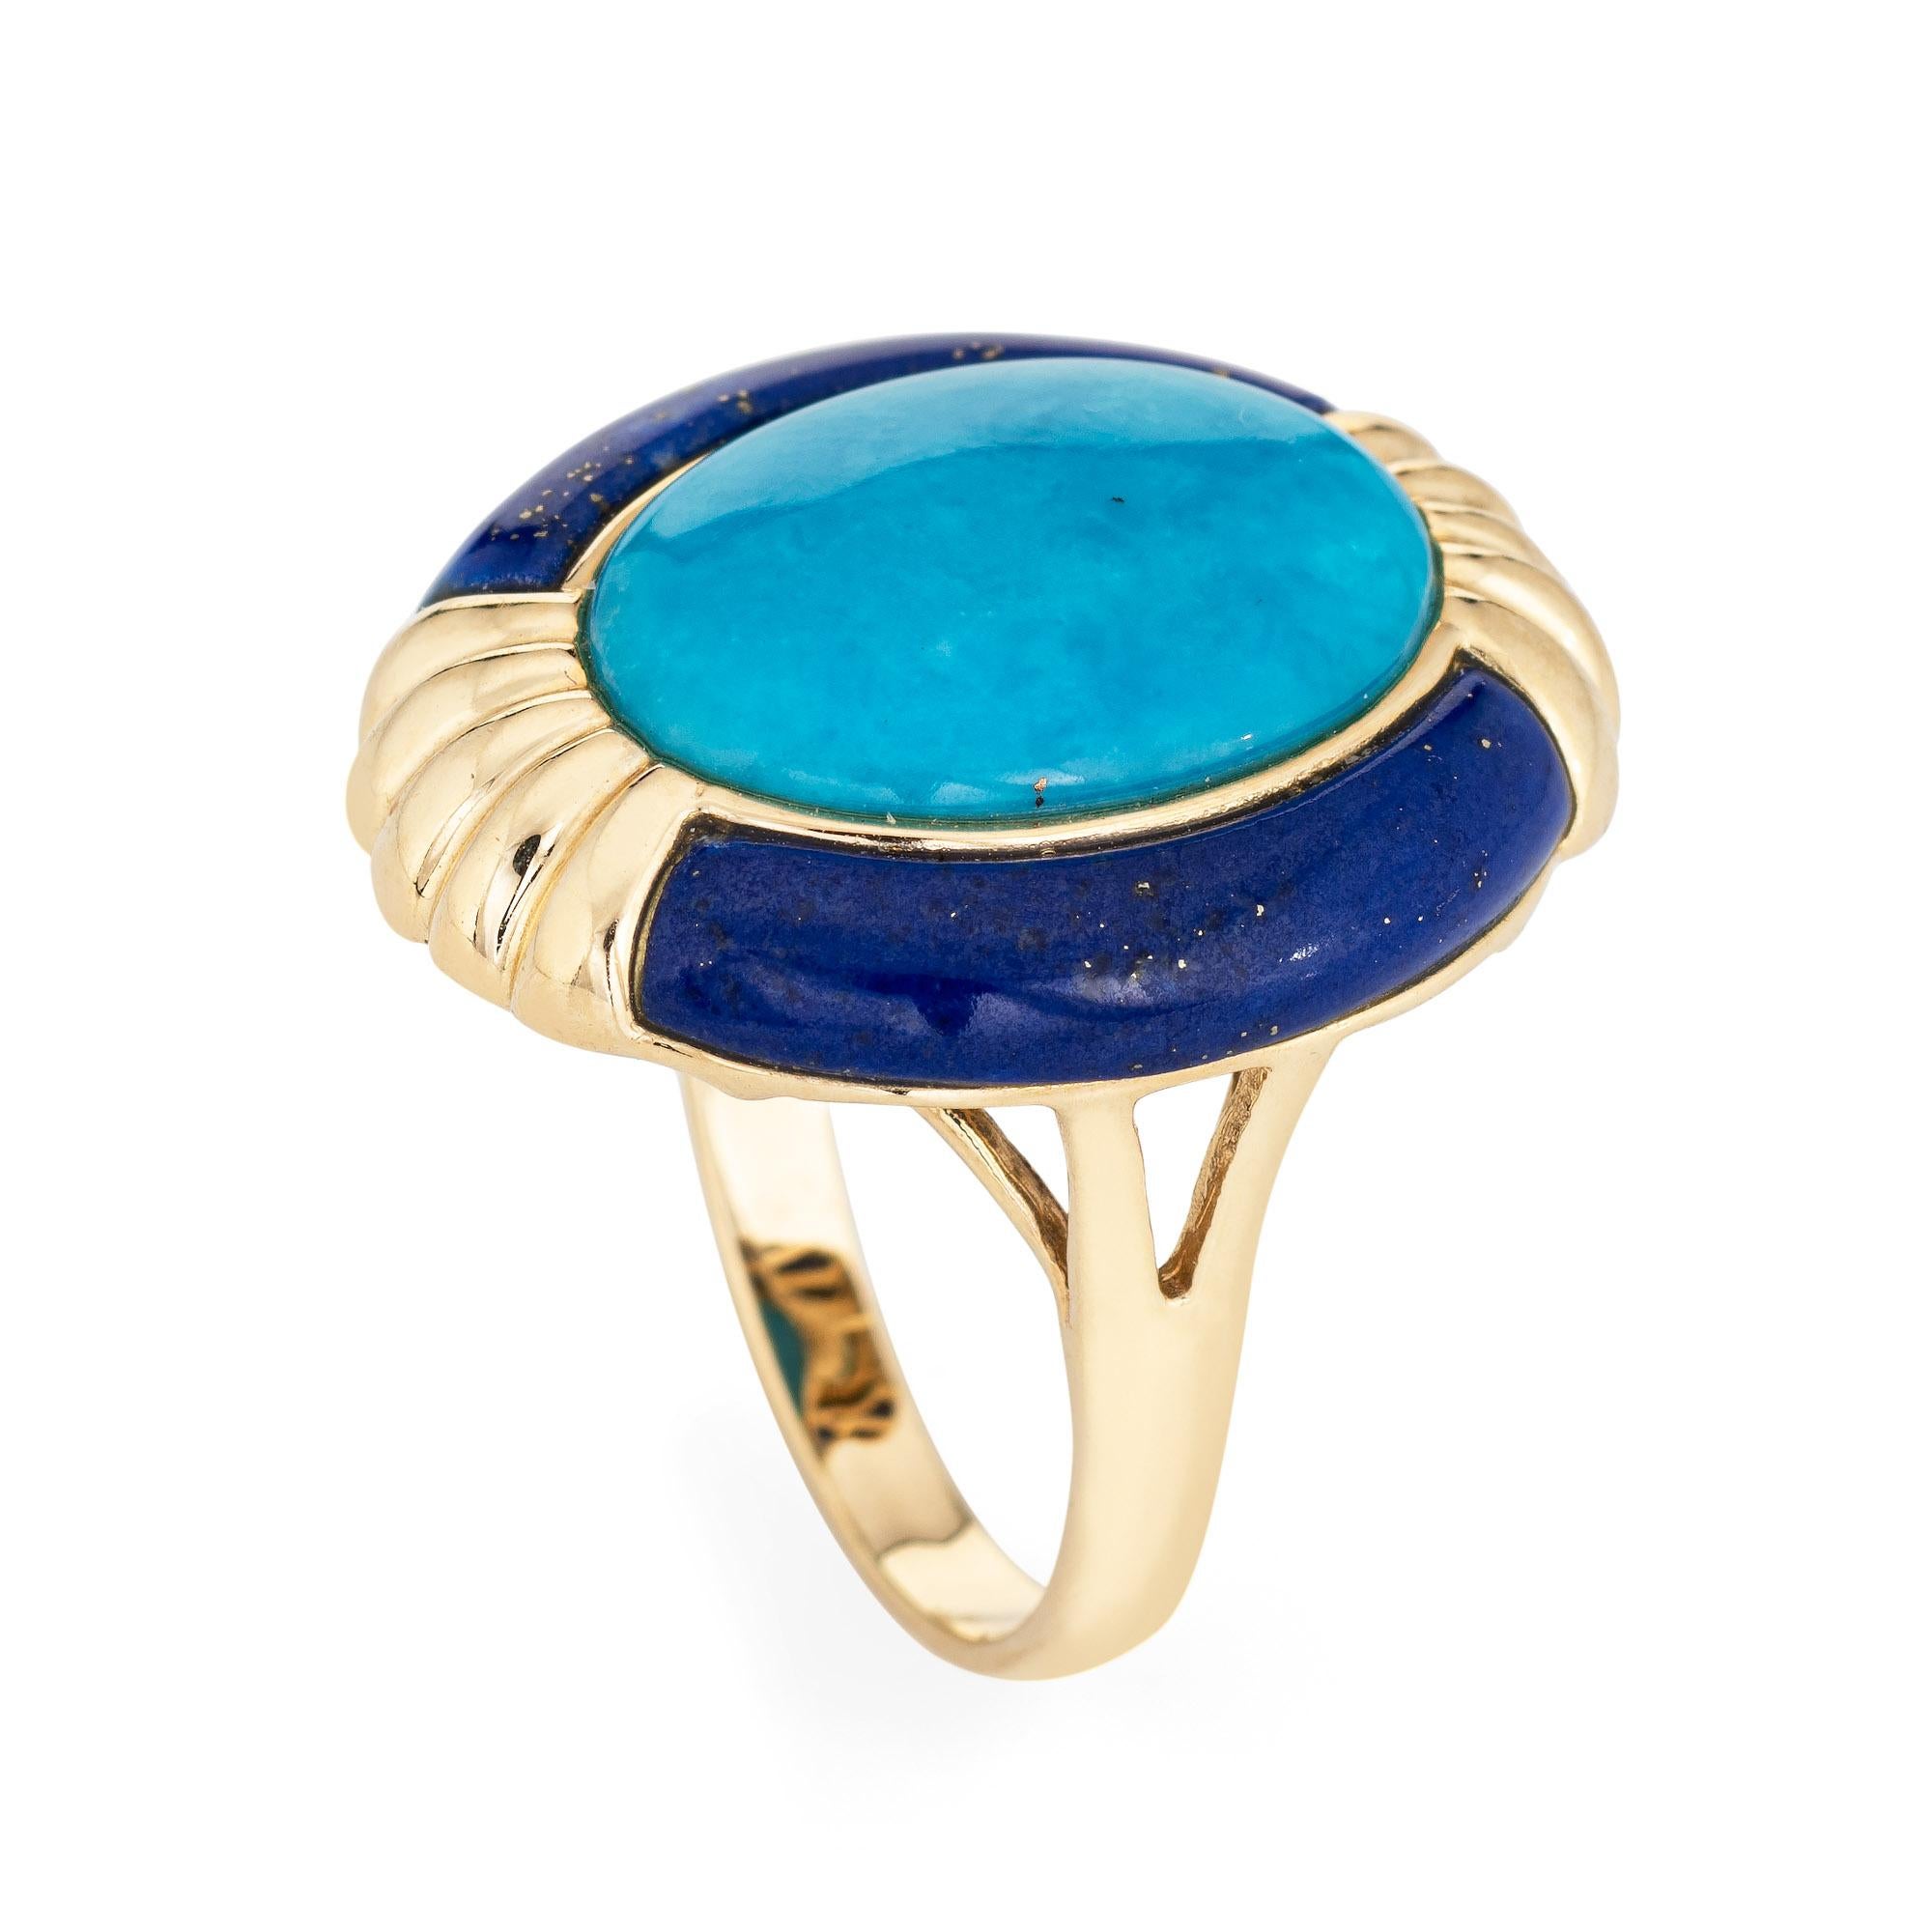 Stylish howlite & lapis lazuli cocktail ring crafted in 14 karat yellow gold. 

Cabochon cut howlite (dyed) measures 16mm x 12mm. Lapis lazuli measures 20mm x 4mm. The stones are in very good condition and free of cracks or chips.  

Blue howlite is